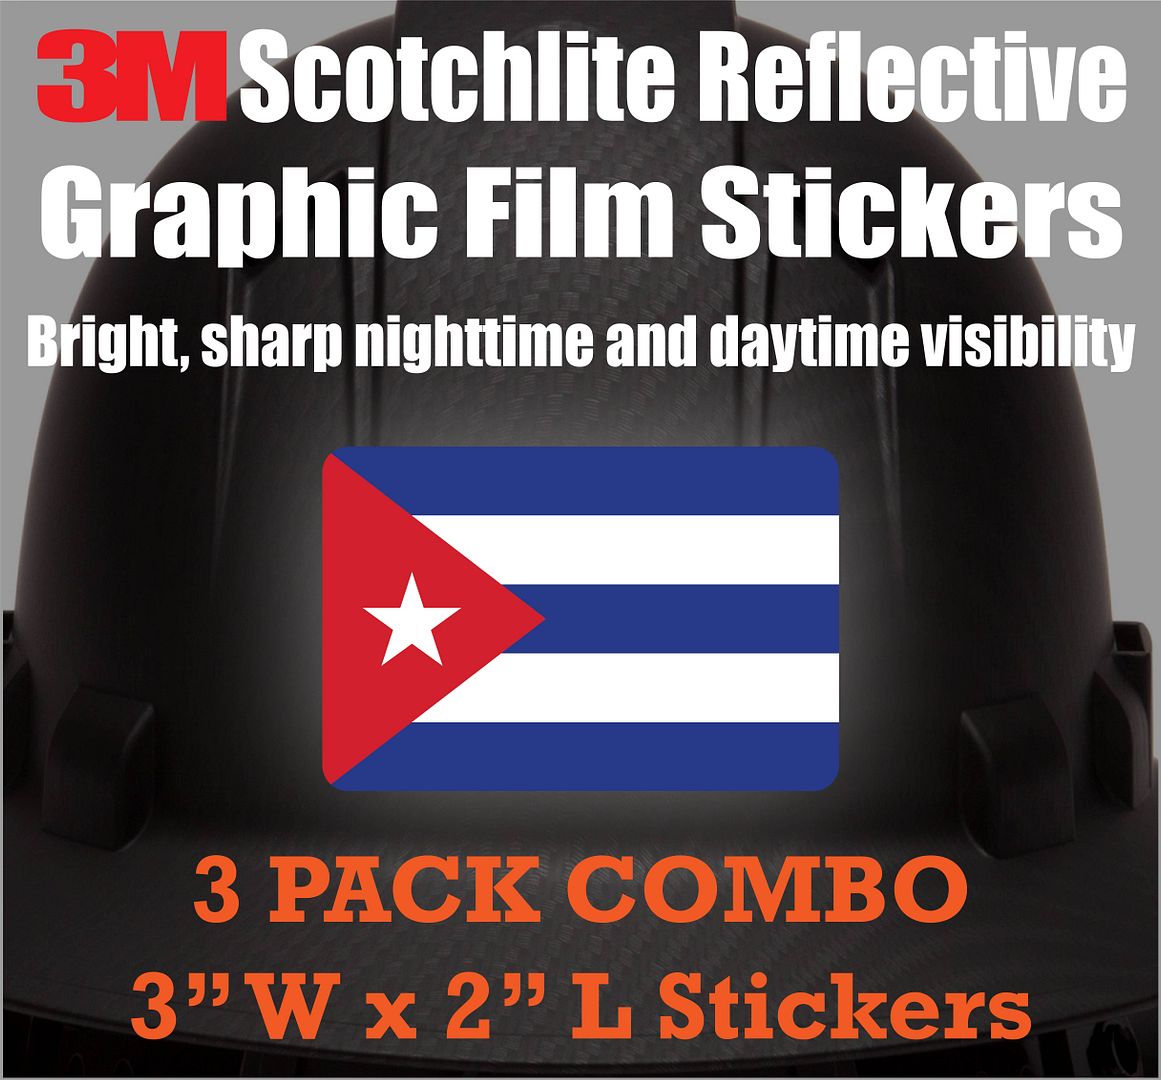 (x3) 3M Reflective Cuba Flag Stickers | Versatile & High Quality Safety Decals | Flag of Cuba Sticker Decals | Perfect for Hard hats, laptops, bikes, toolboxes and more! - image 2 of 3